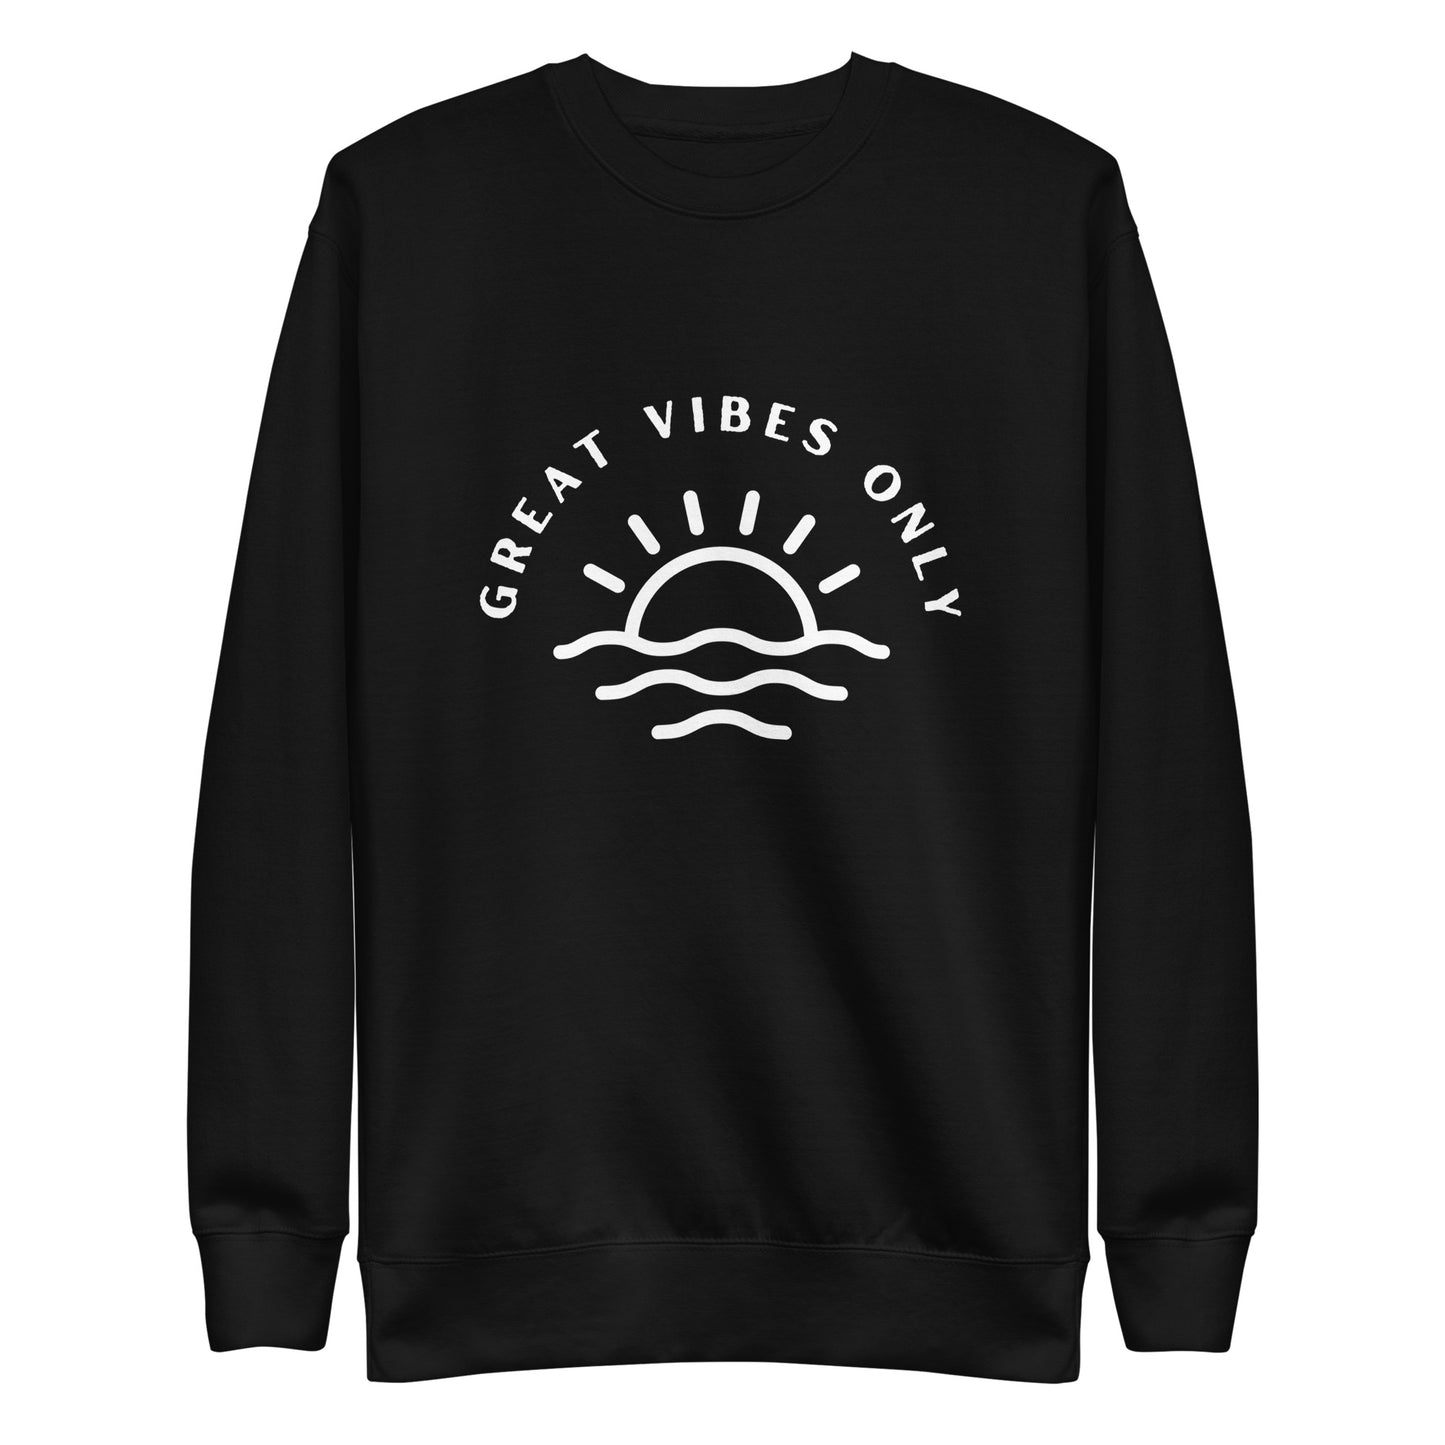 Great Vibes Only Sweatshirt